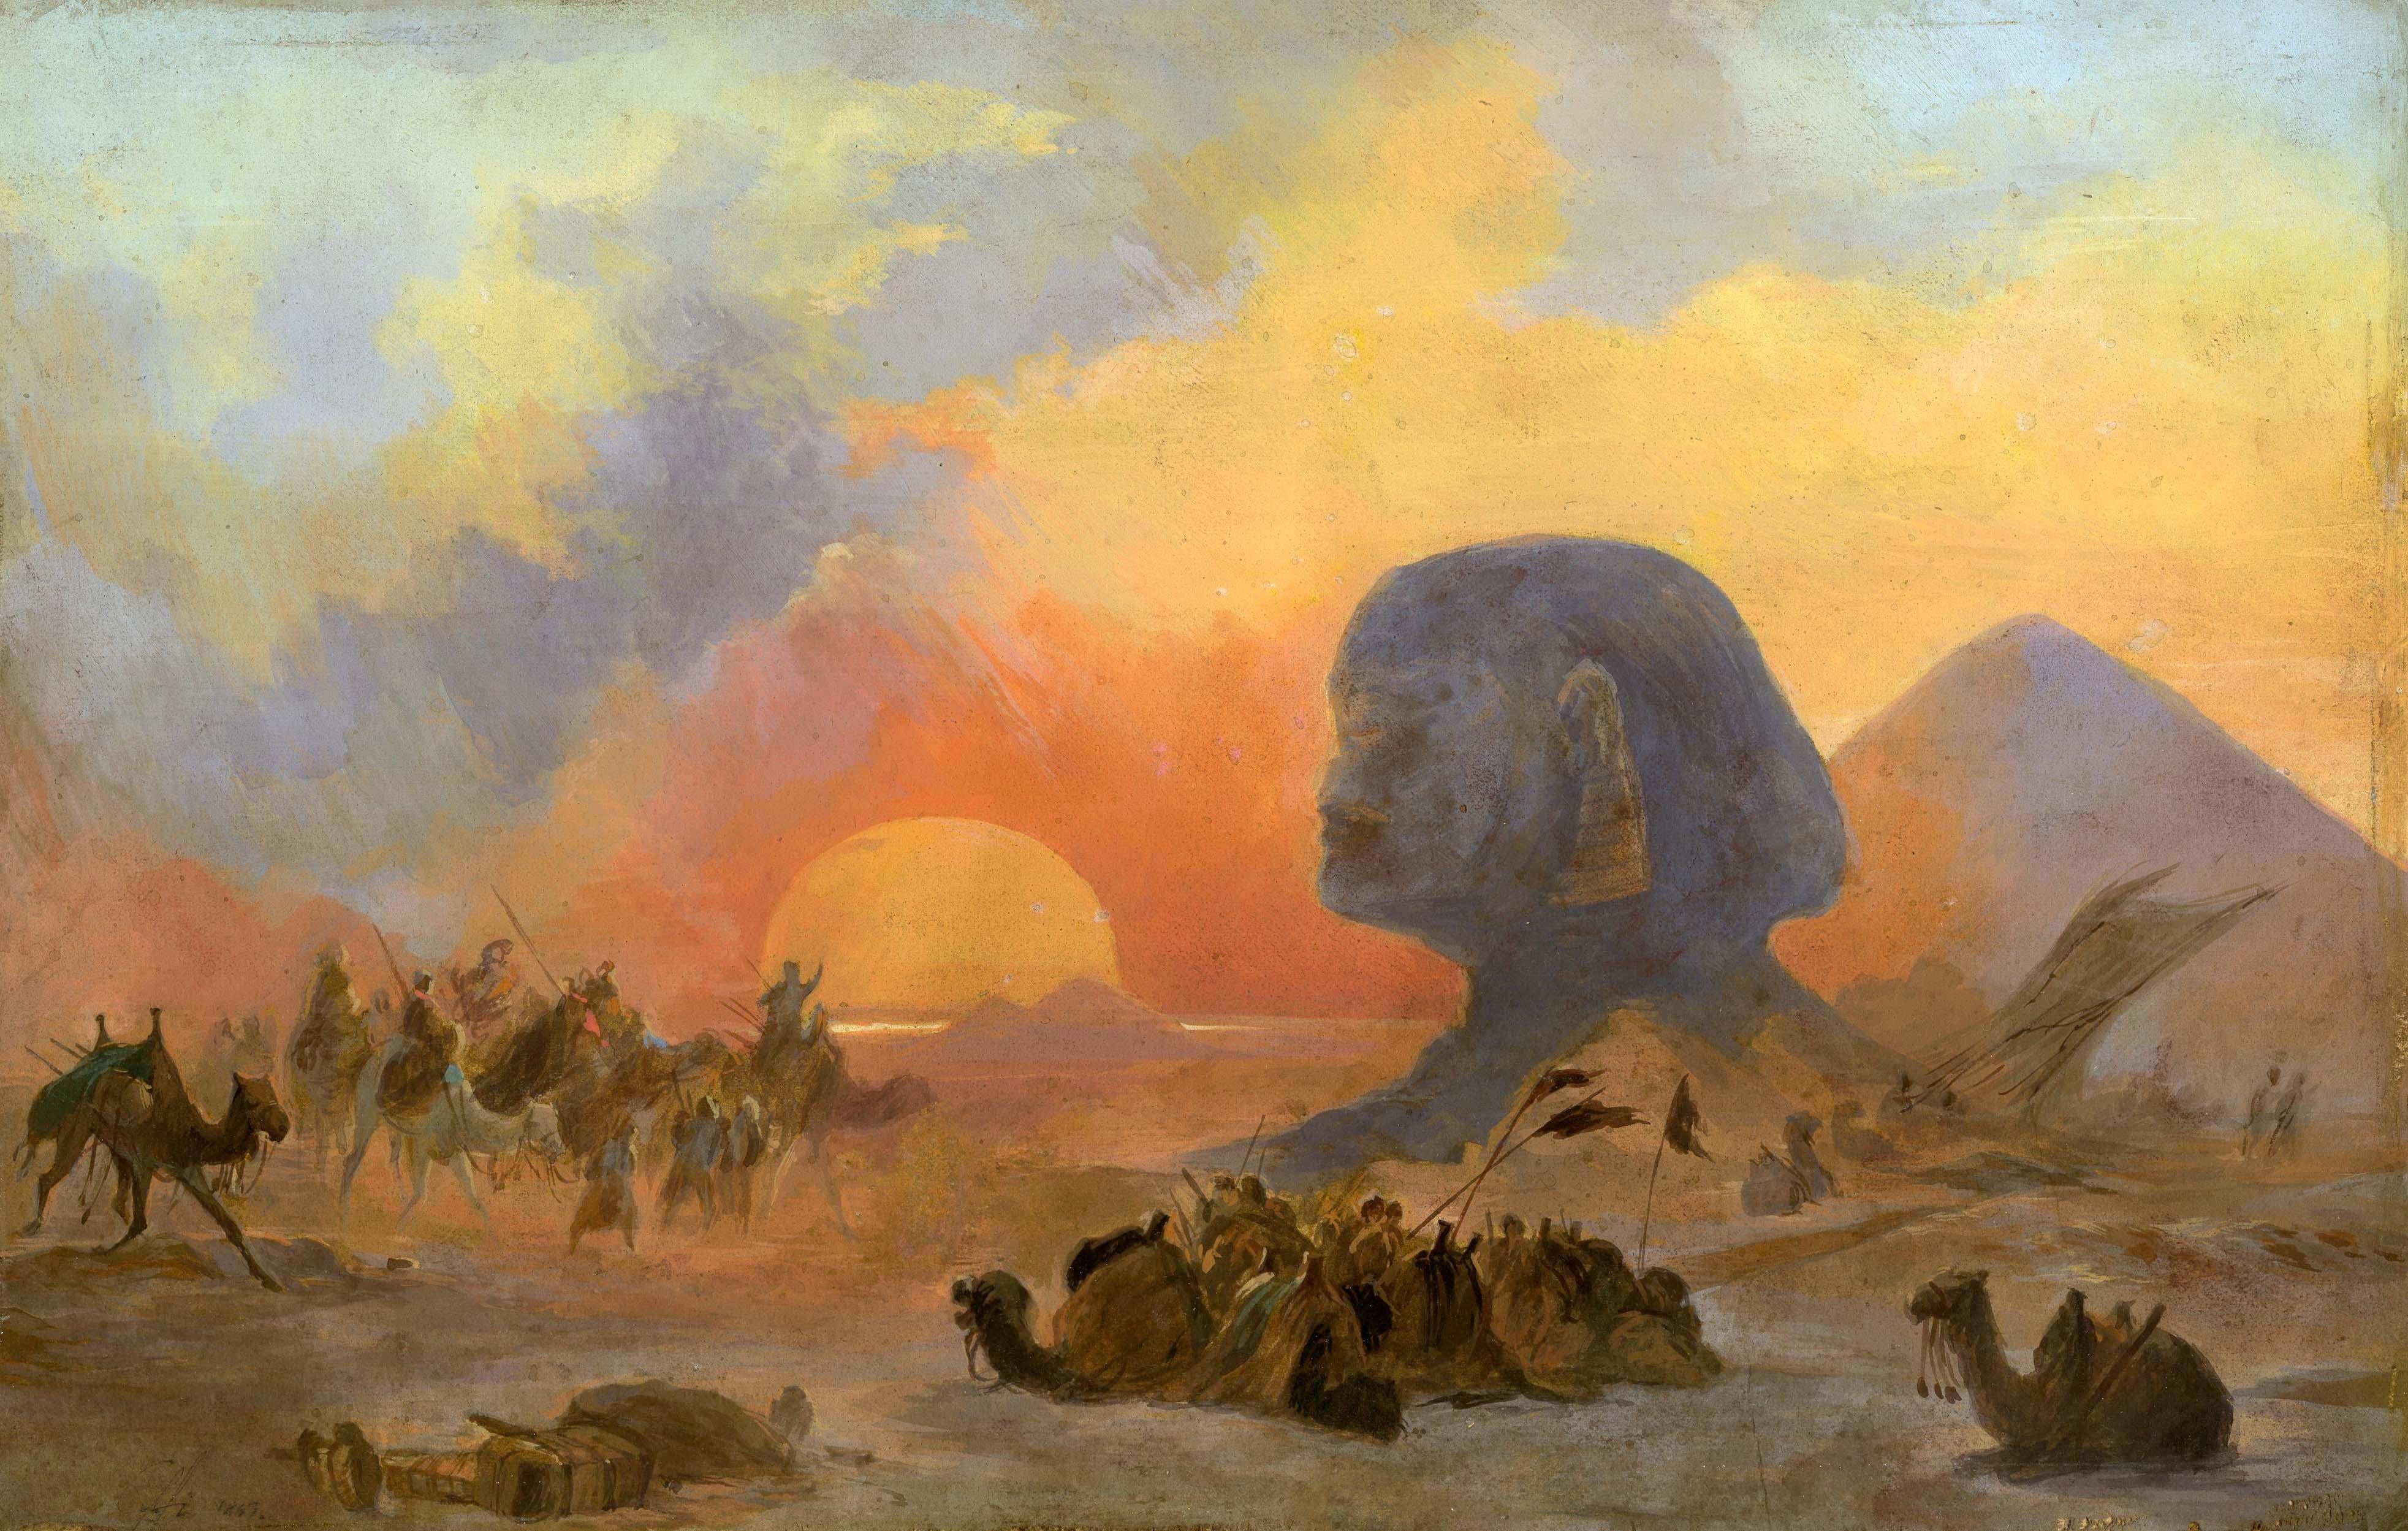 Cairo, The Simoun Wind in the Desert - Painting by Ippolito Caffi